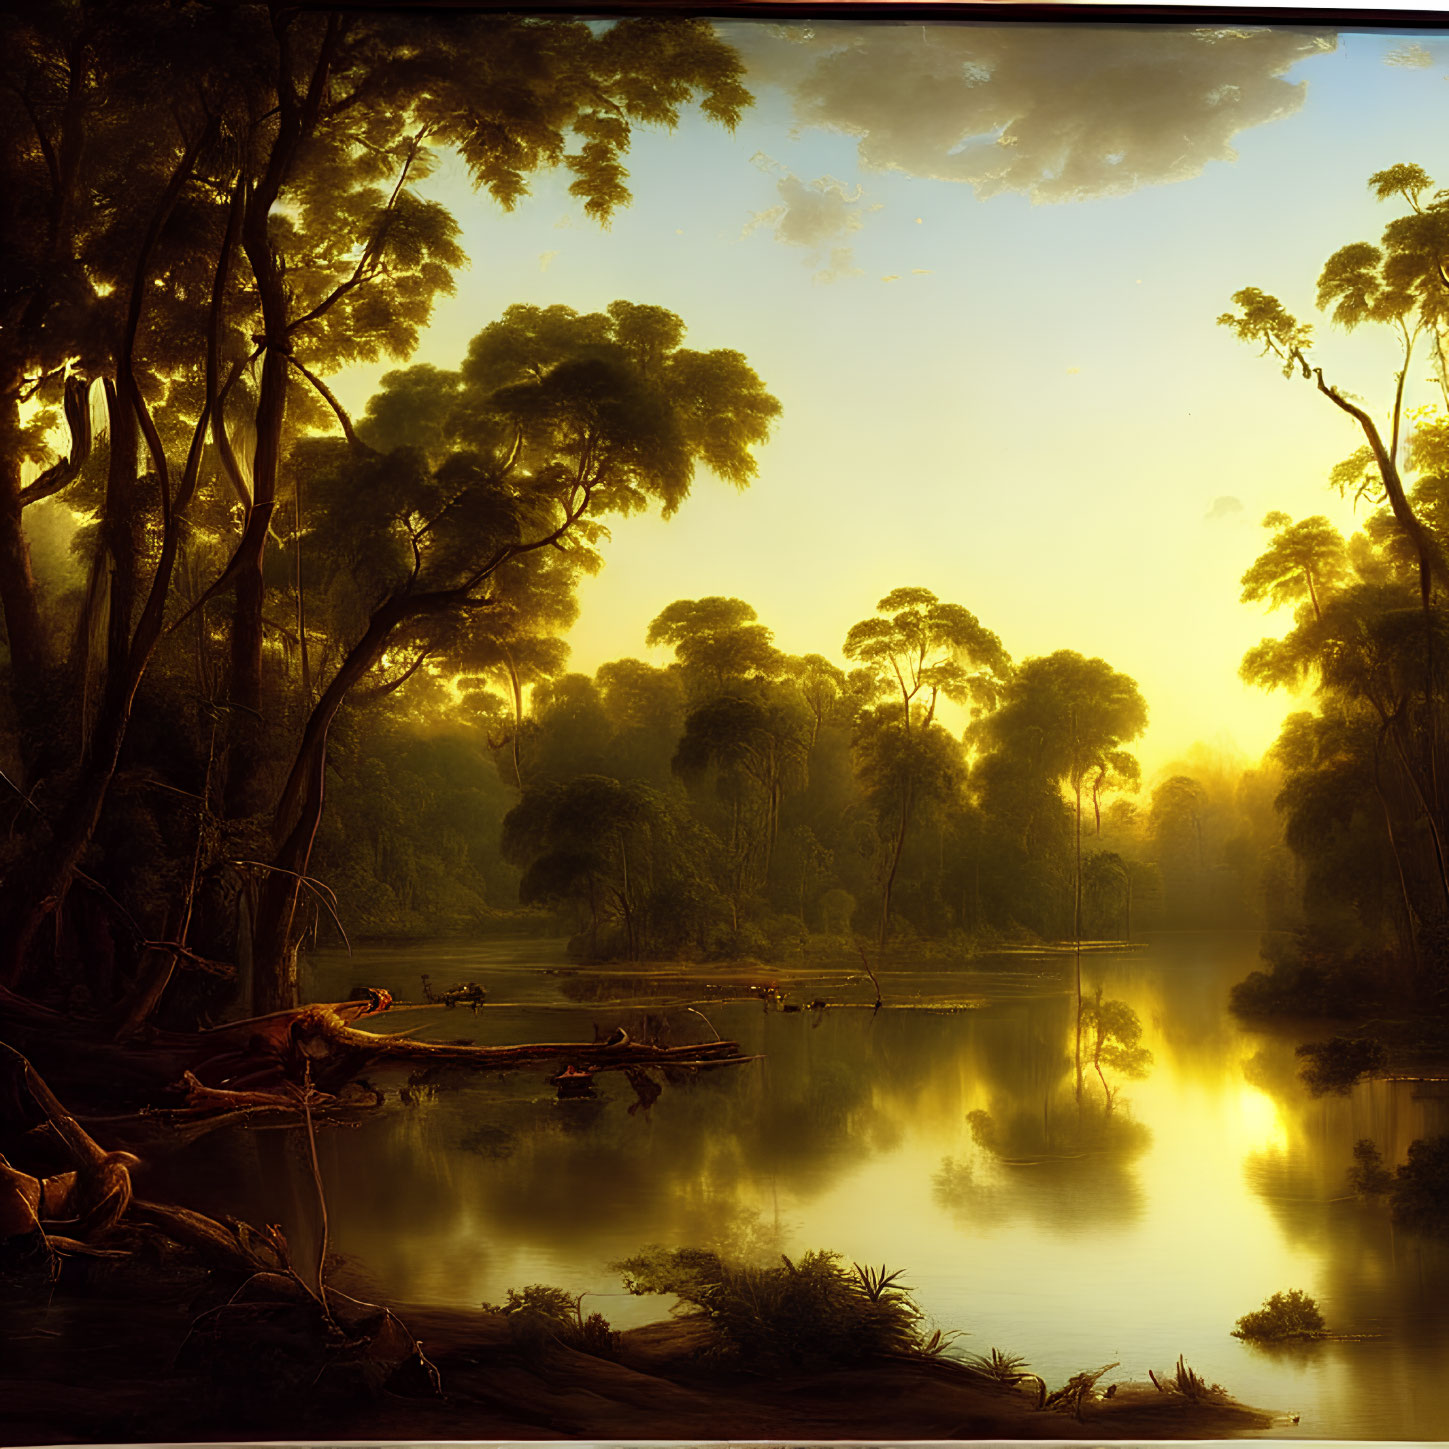 Tranquil golden landscape with calm river and lush trees